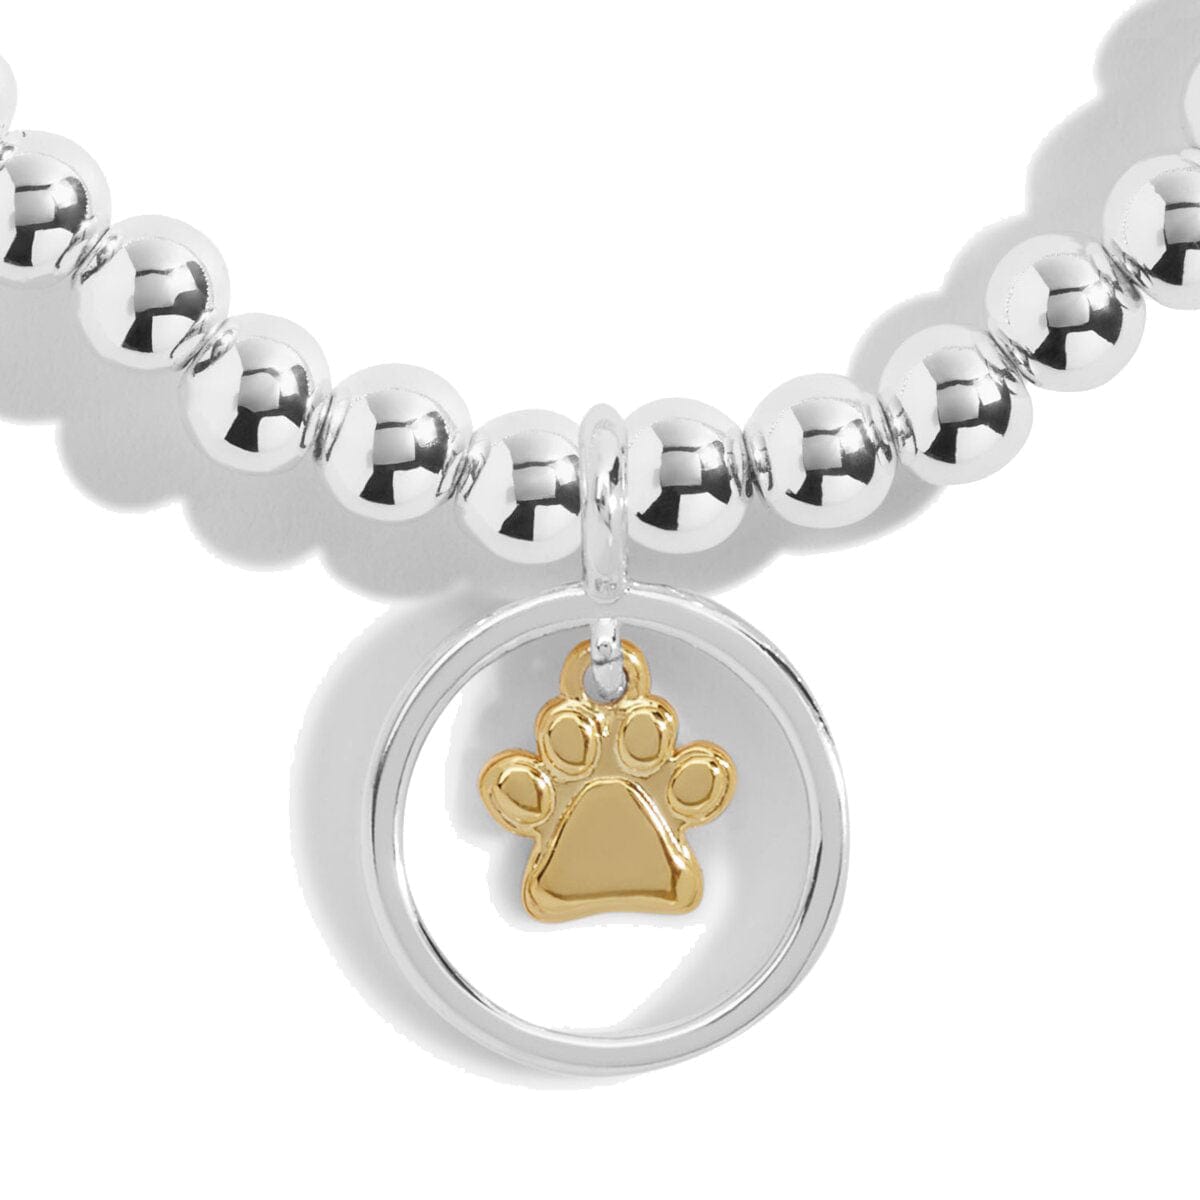 Joma Jewellery Boxed Bracelet Joma Jewellery Beautifully Boxed Bracelet - Pets Leave Pawprints On Our Hearts